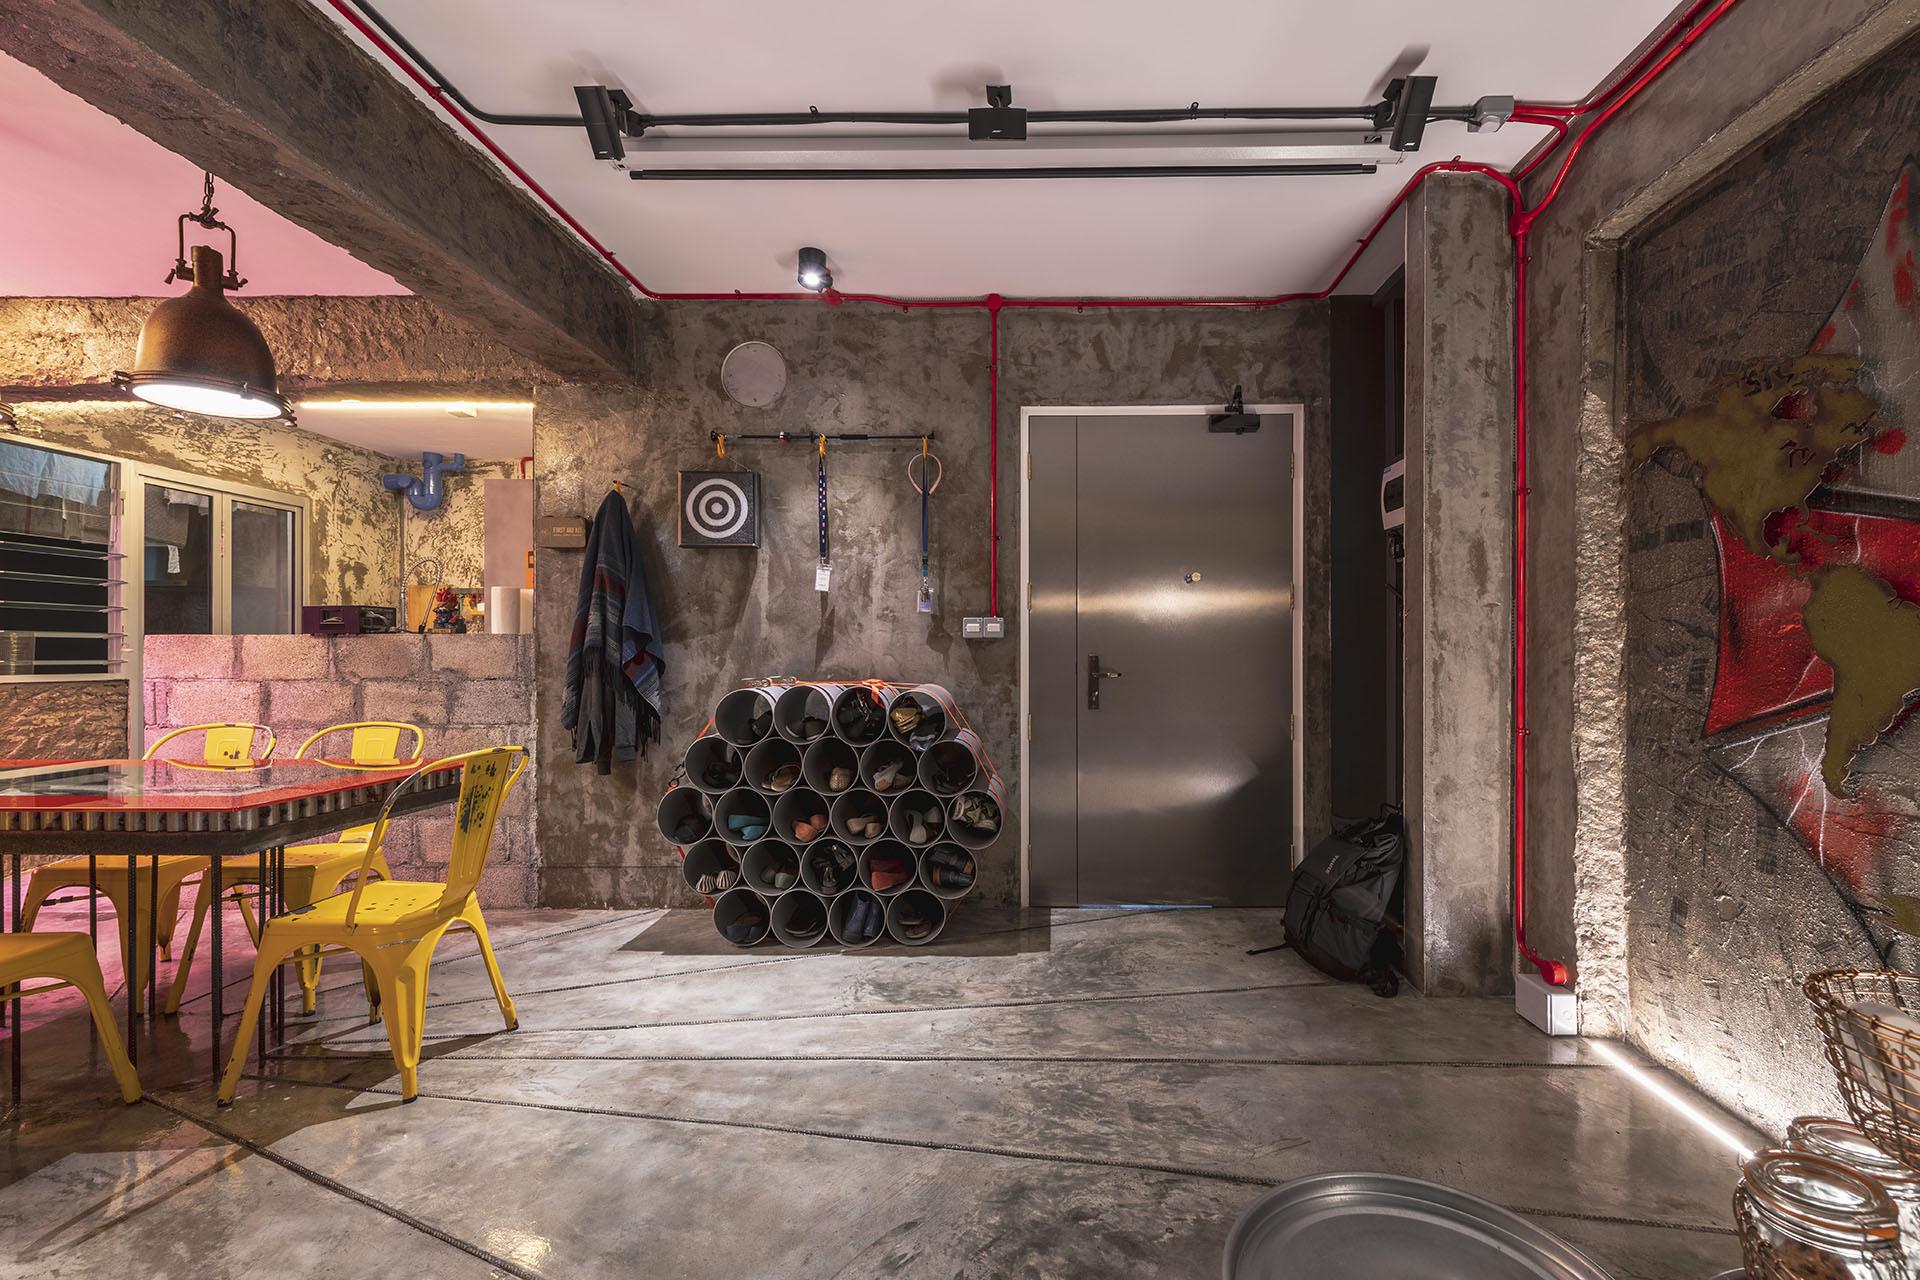 A Raw Dystopian World Inside This Singapore Flat